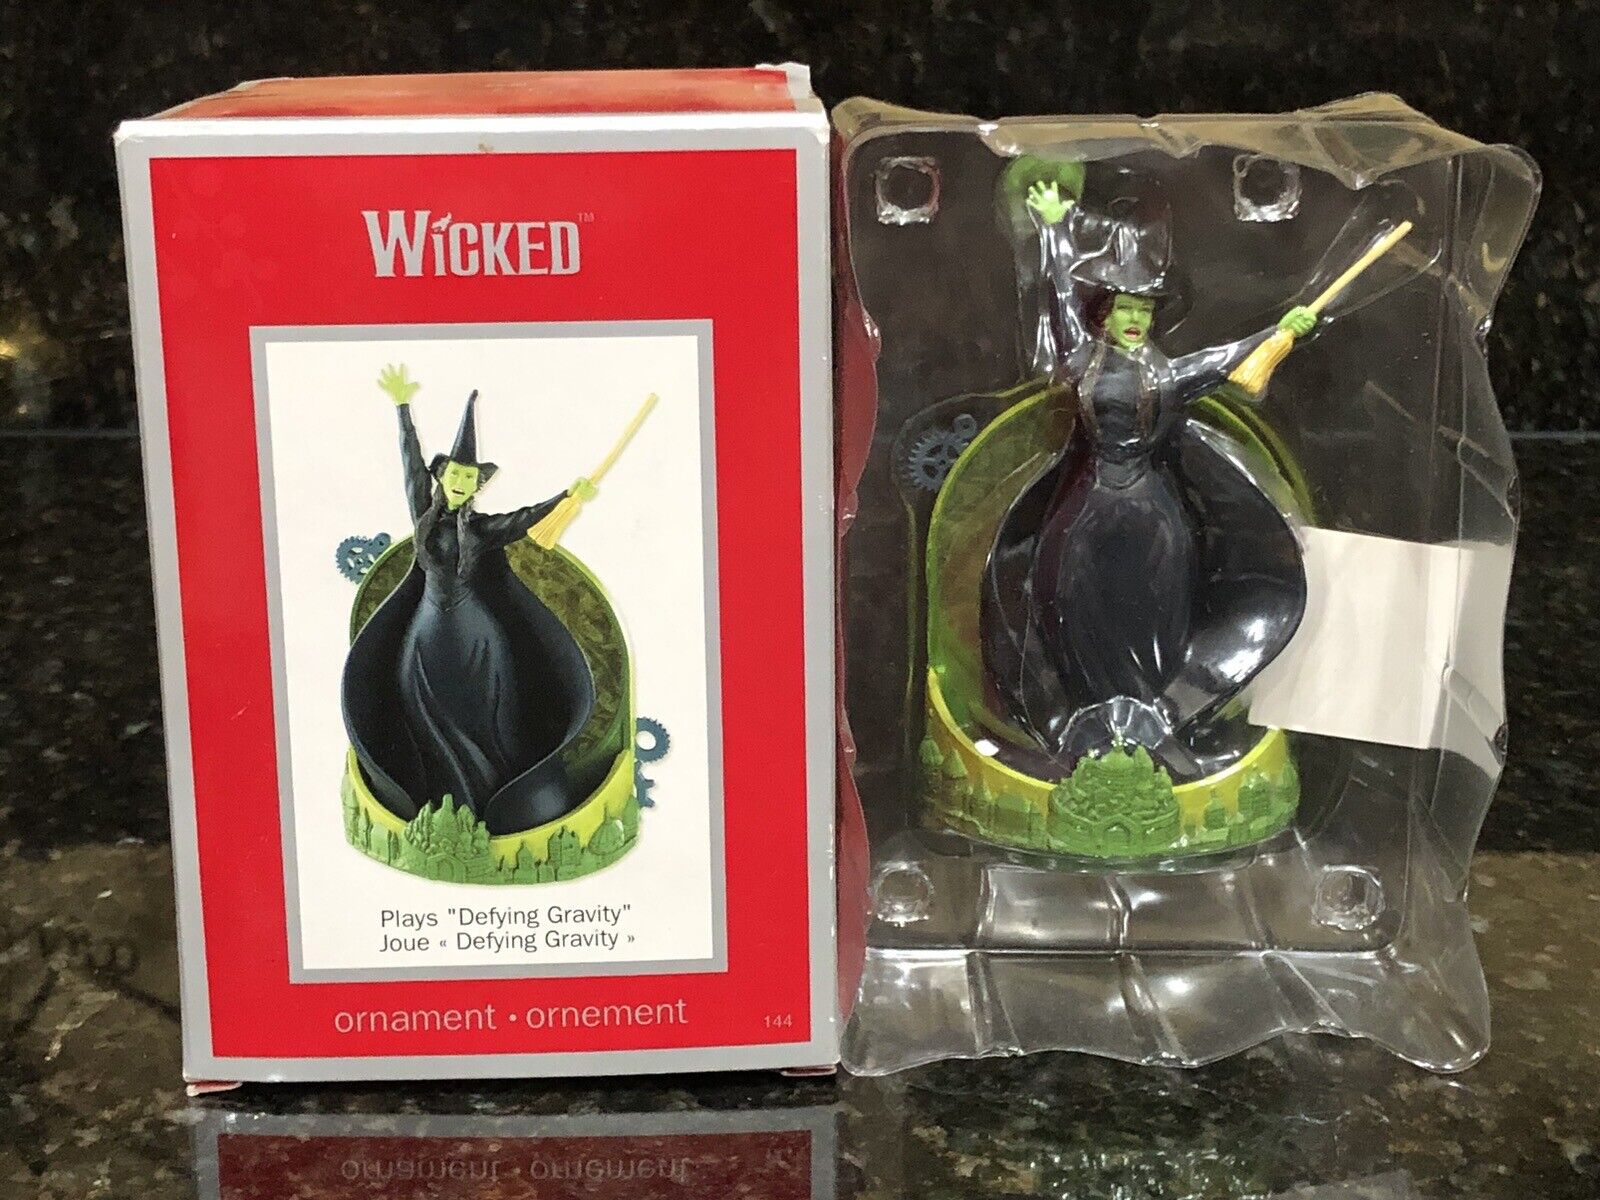 2010 Heirloom Ornament  WICKED Plays “ Defying Gravity”